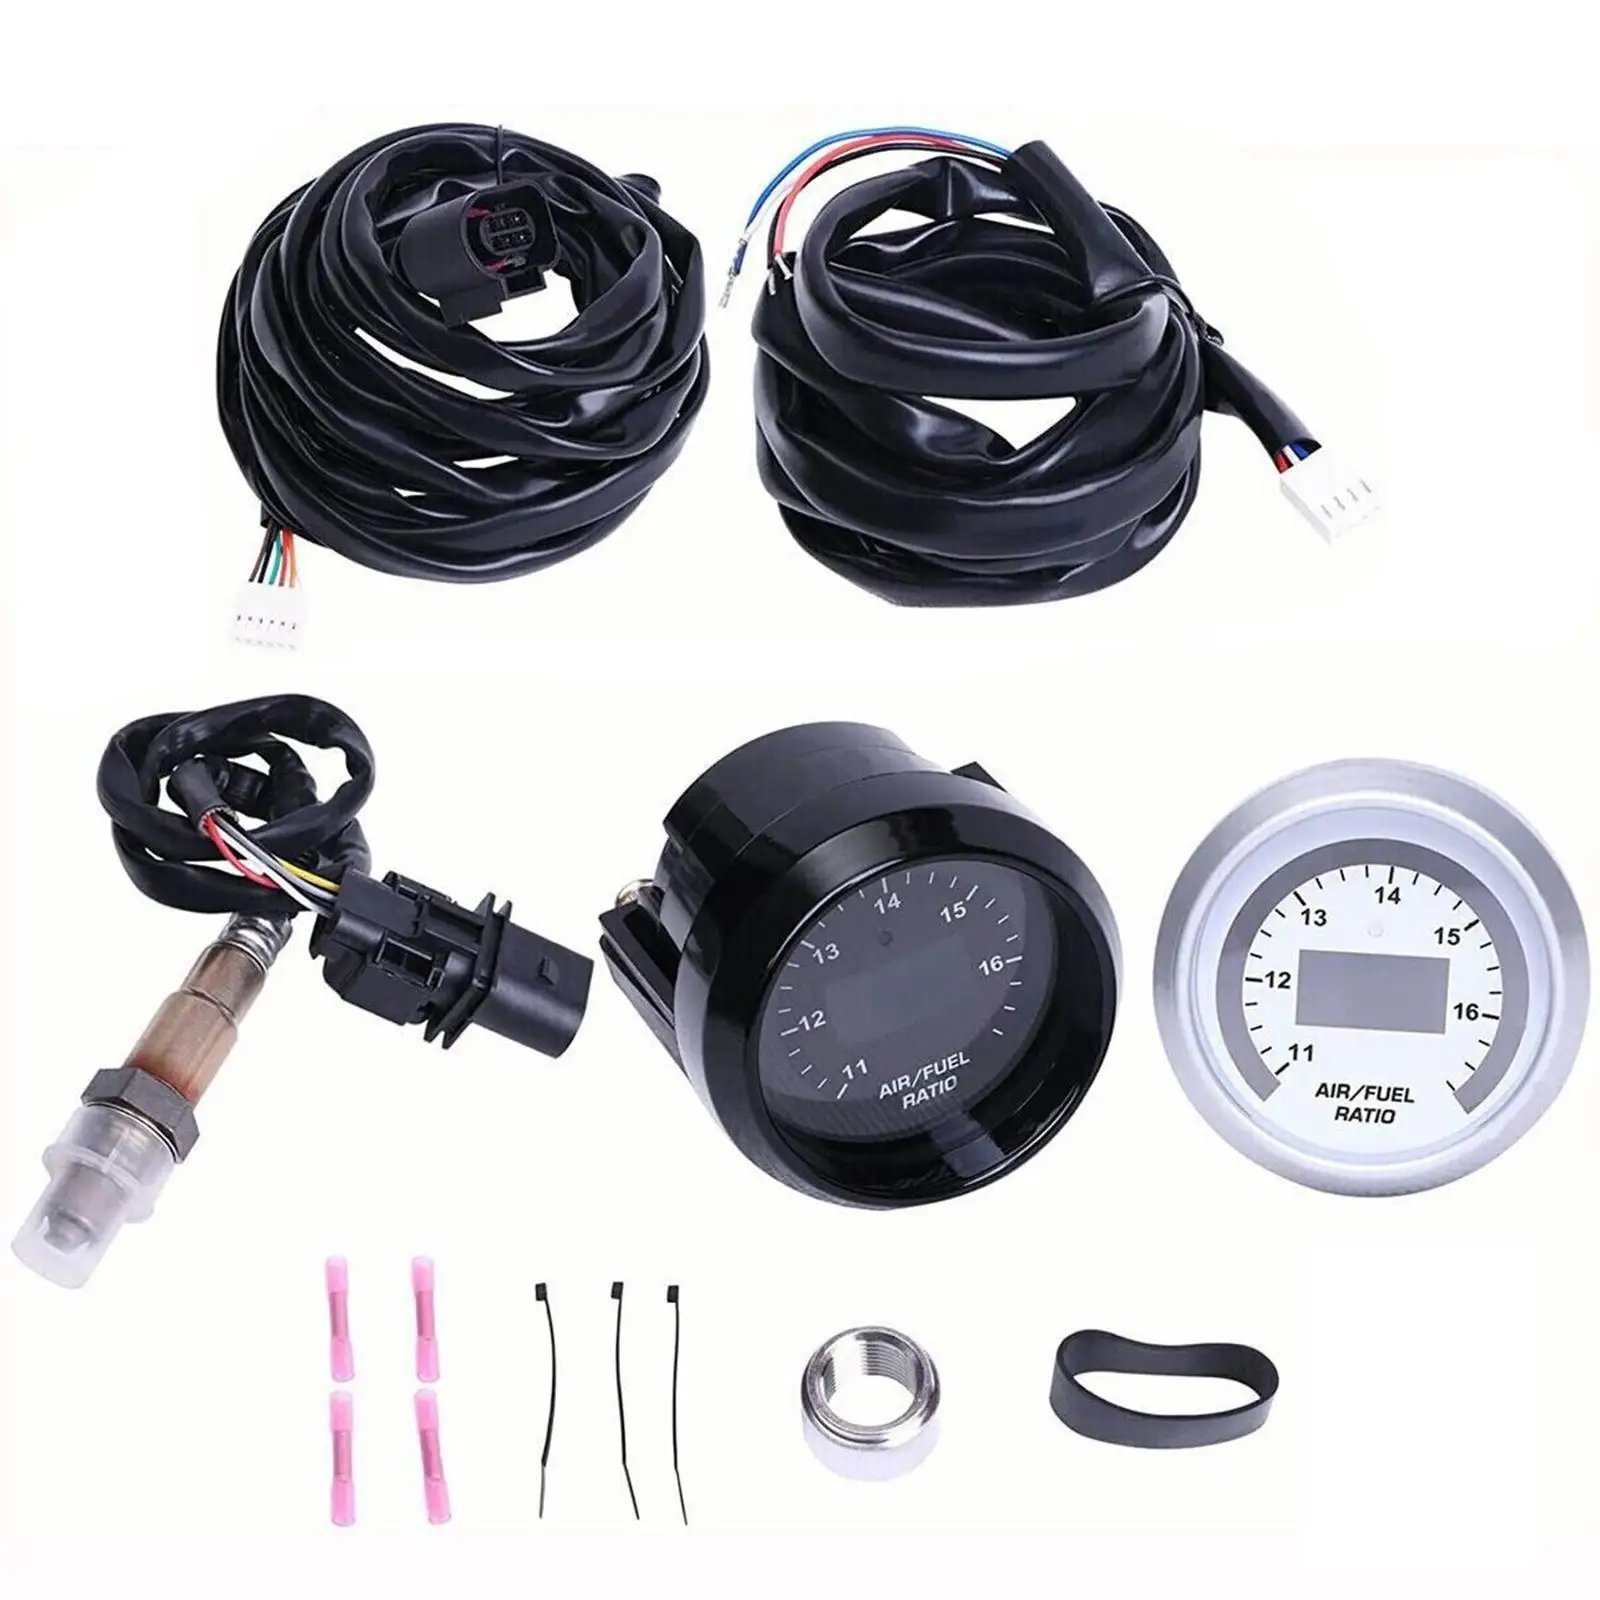 Air Fuel Ratio Gauge Spare Parts Assembly Replacement with 4.9 Sensor Easy to Install Durable 30-4110 Afr 52mm Afr Gauge Set